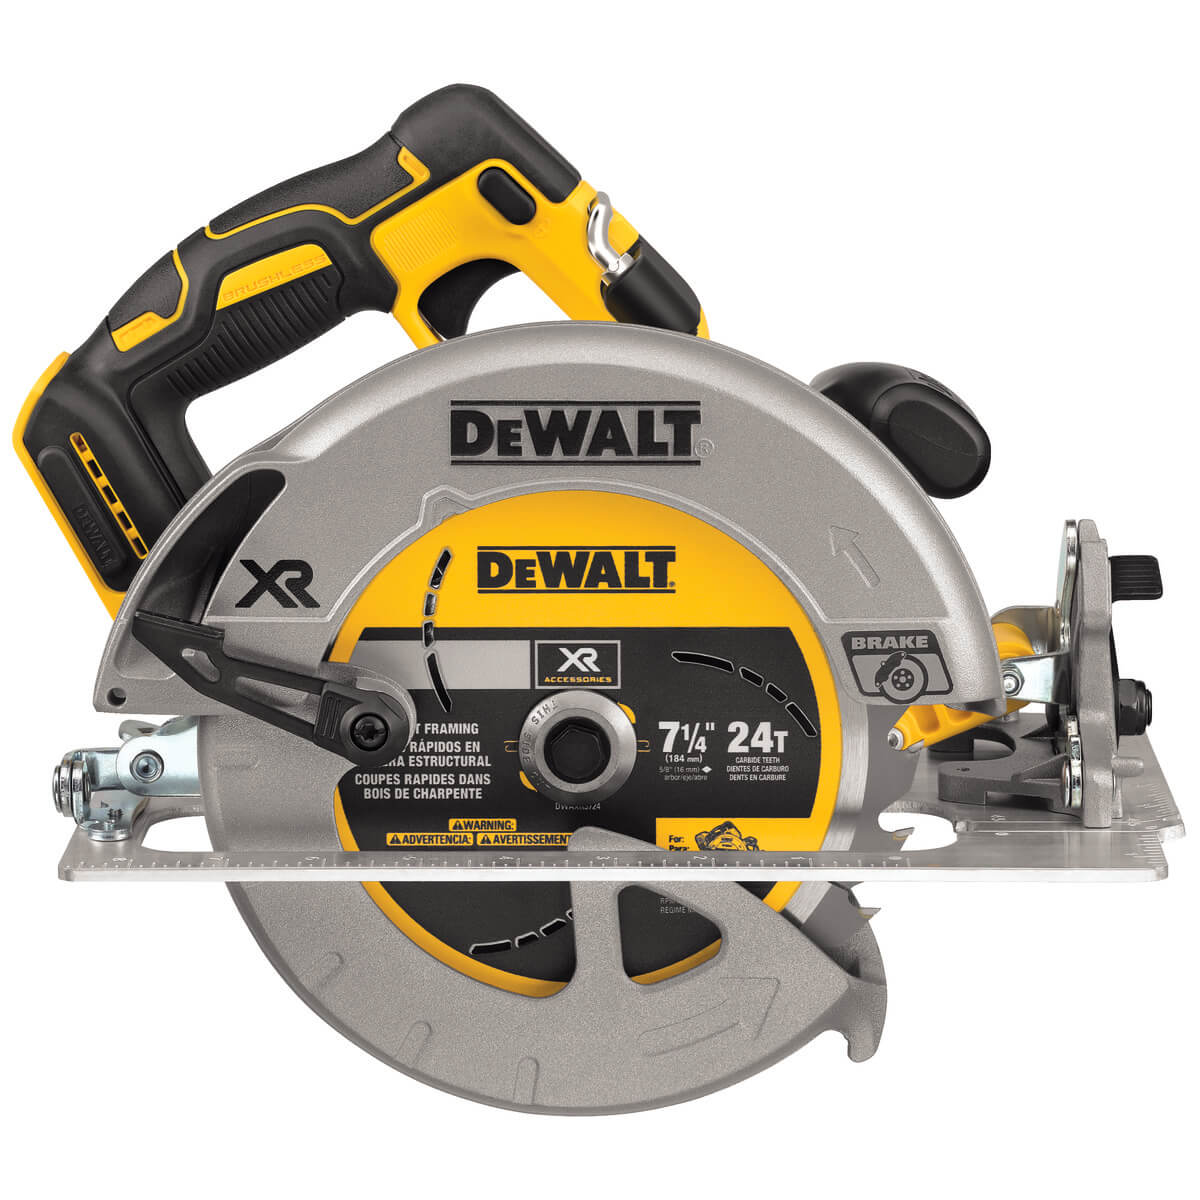 DCS570B 20V MAX XR 7-1/4" Circular Saw - TOOL ONLY - wise-line-tools